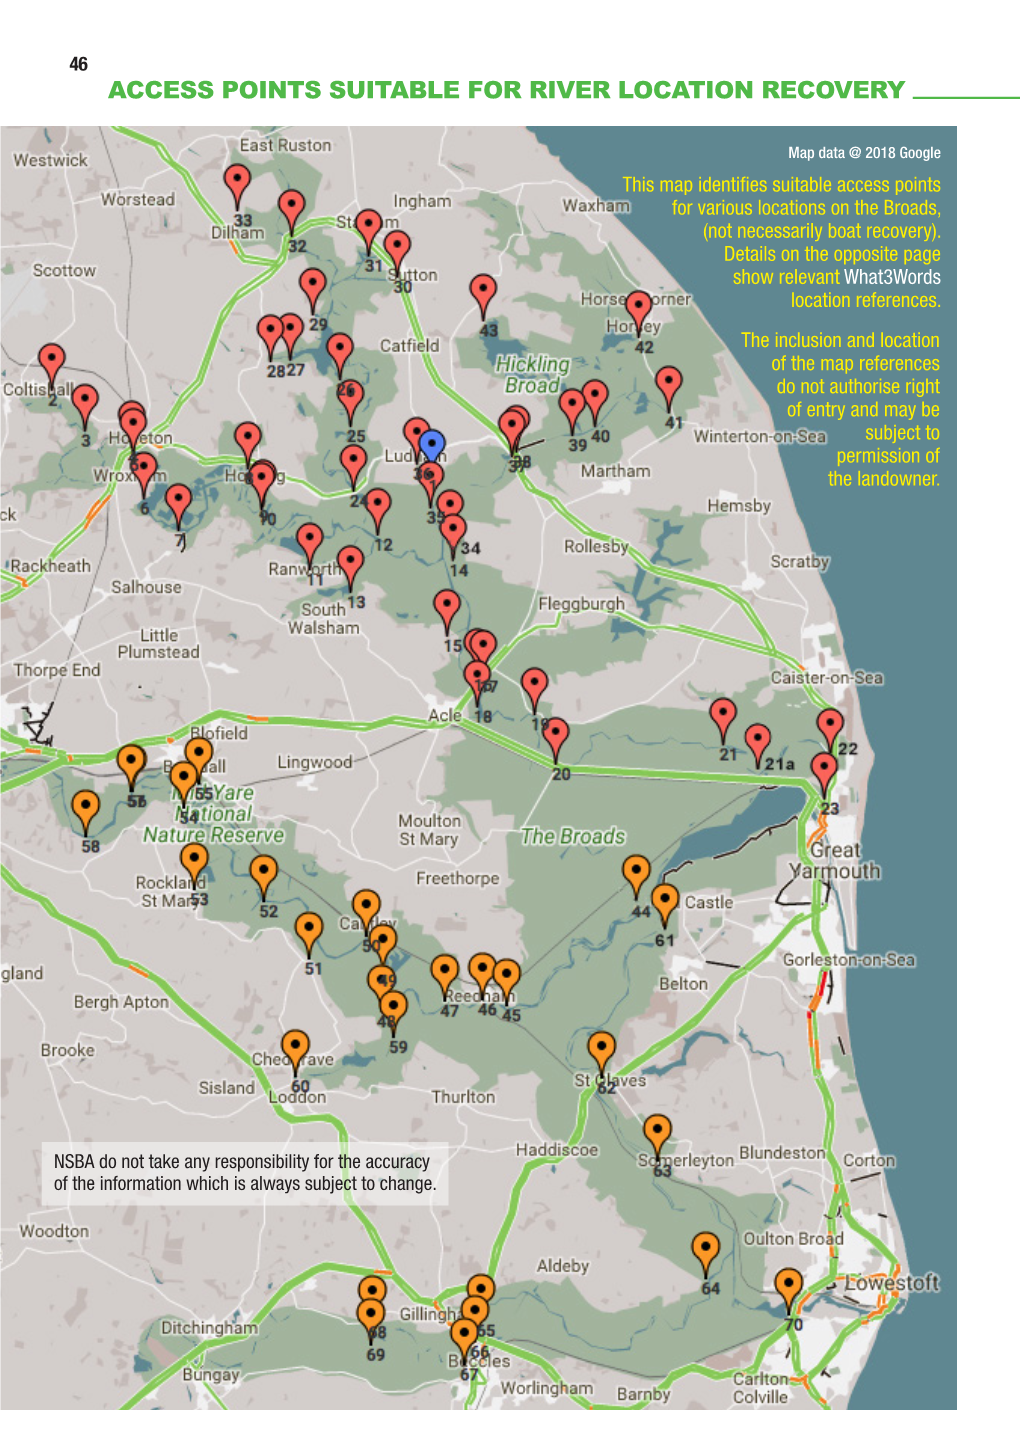 Map – Access Points Suitable for River Location Recovery